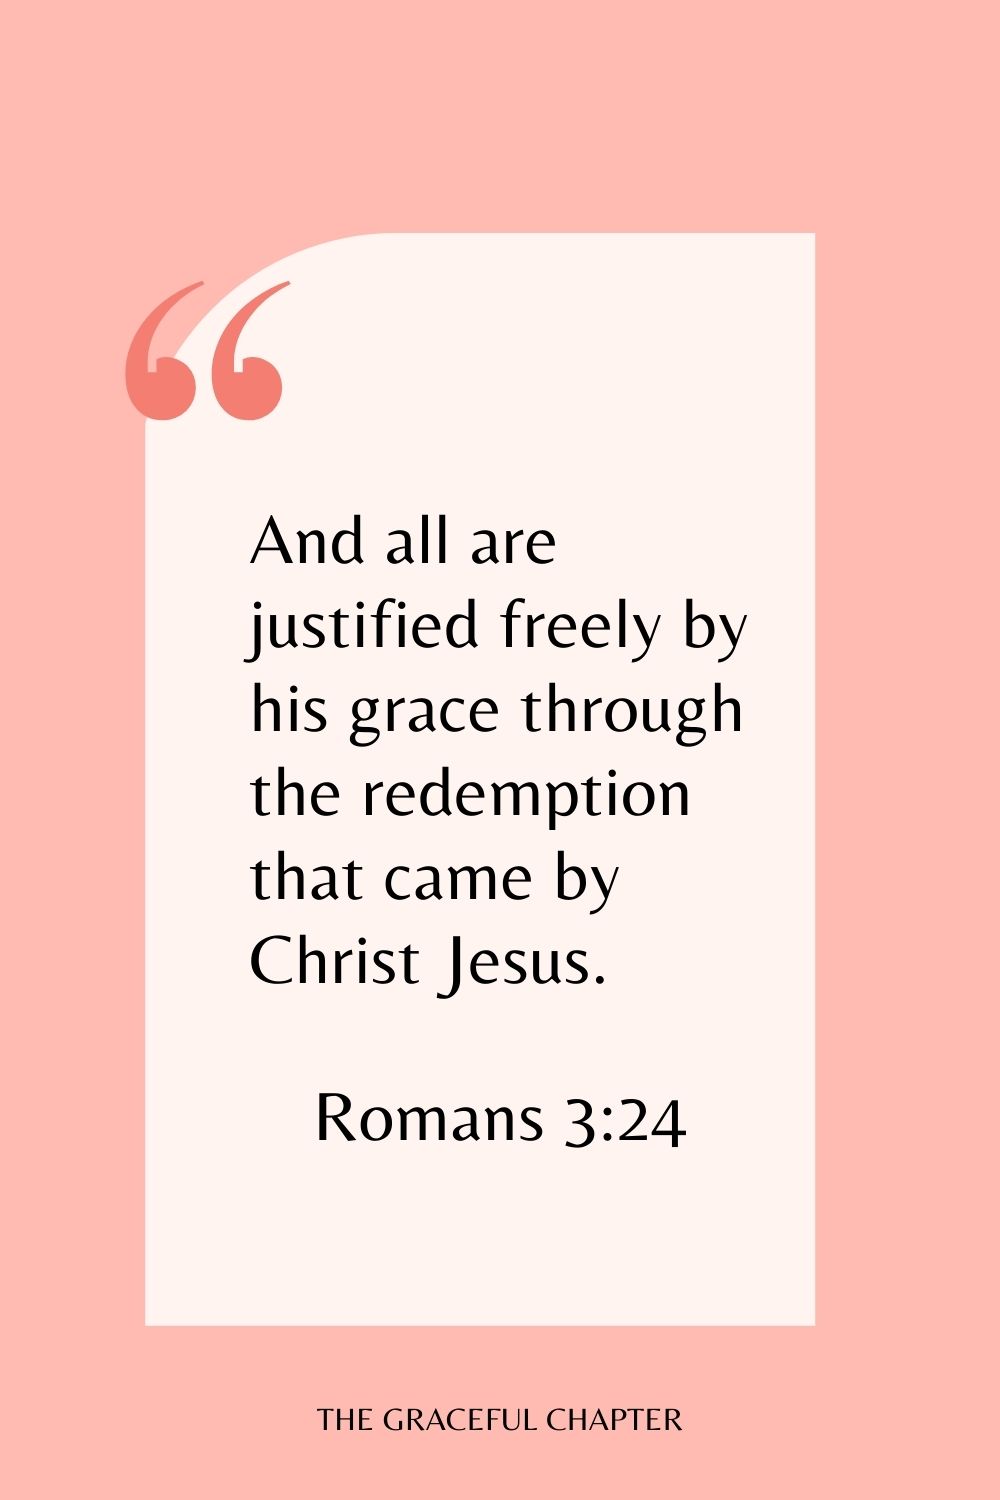 And all are justified freely by his grace through the redemption that came by Christ Jesus. Romans 3:24